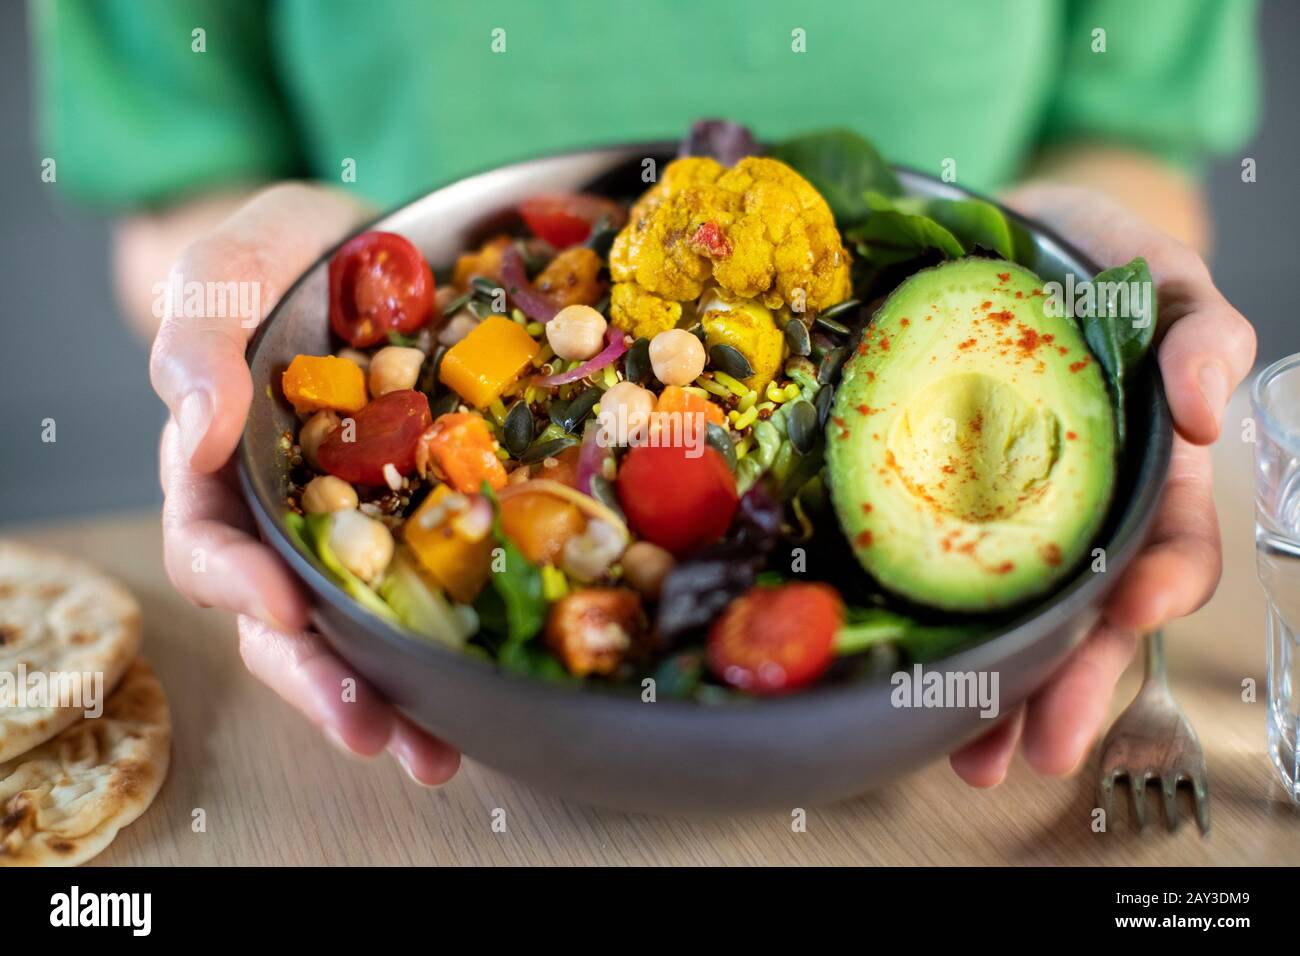 Close Up Of Woman Eating Healthy Vegan Meal In Bowl Stock Photo